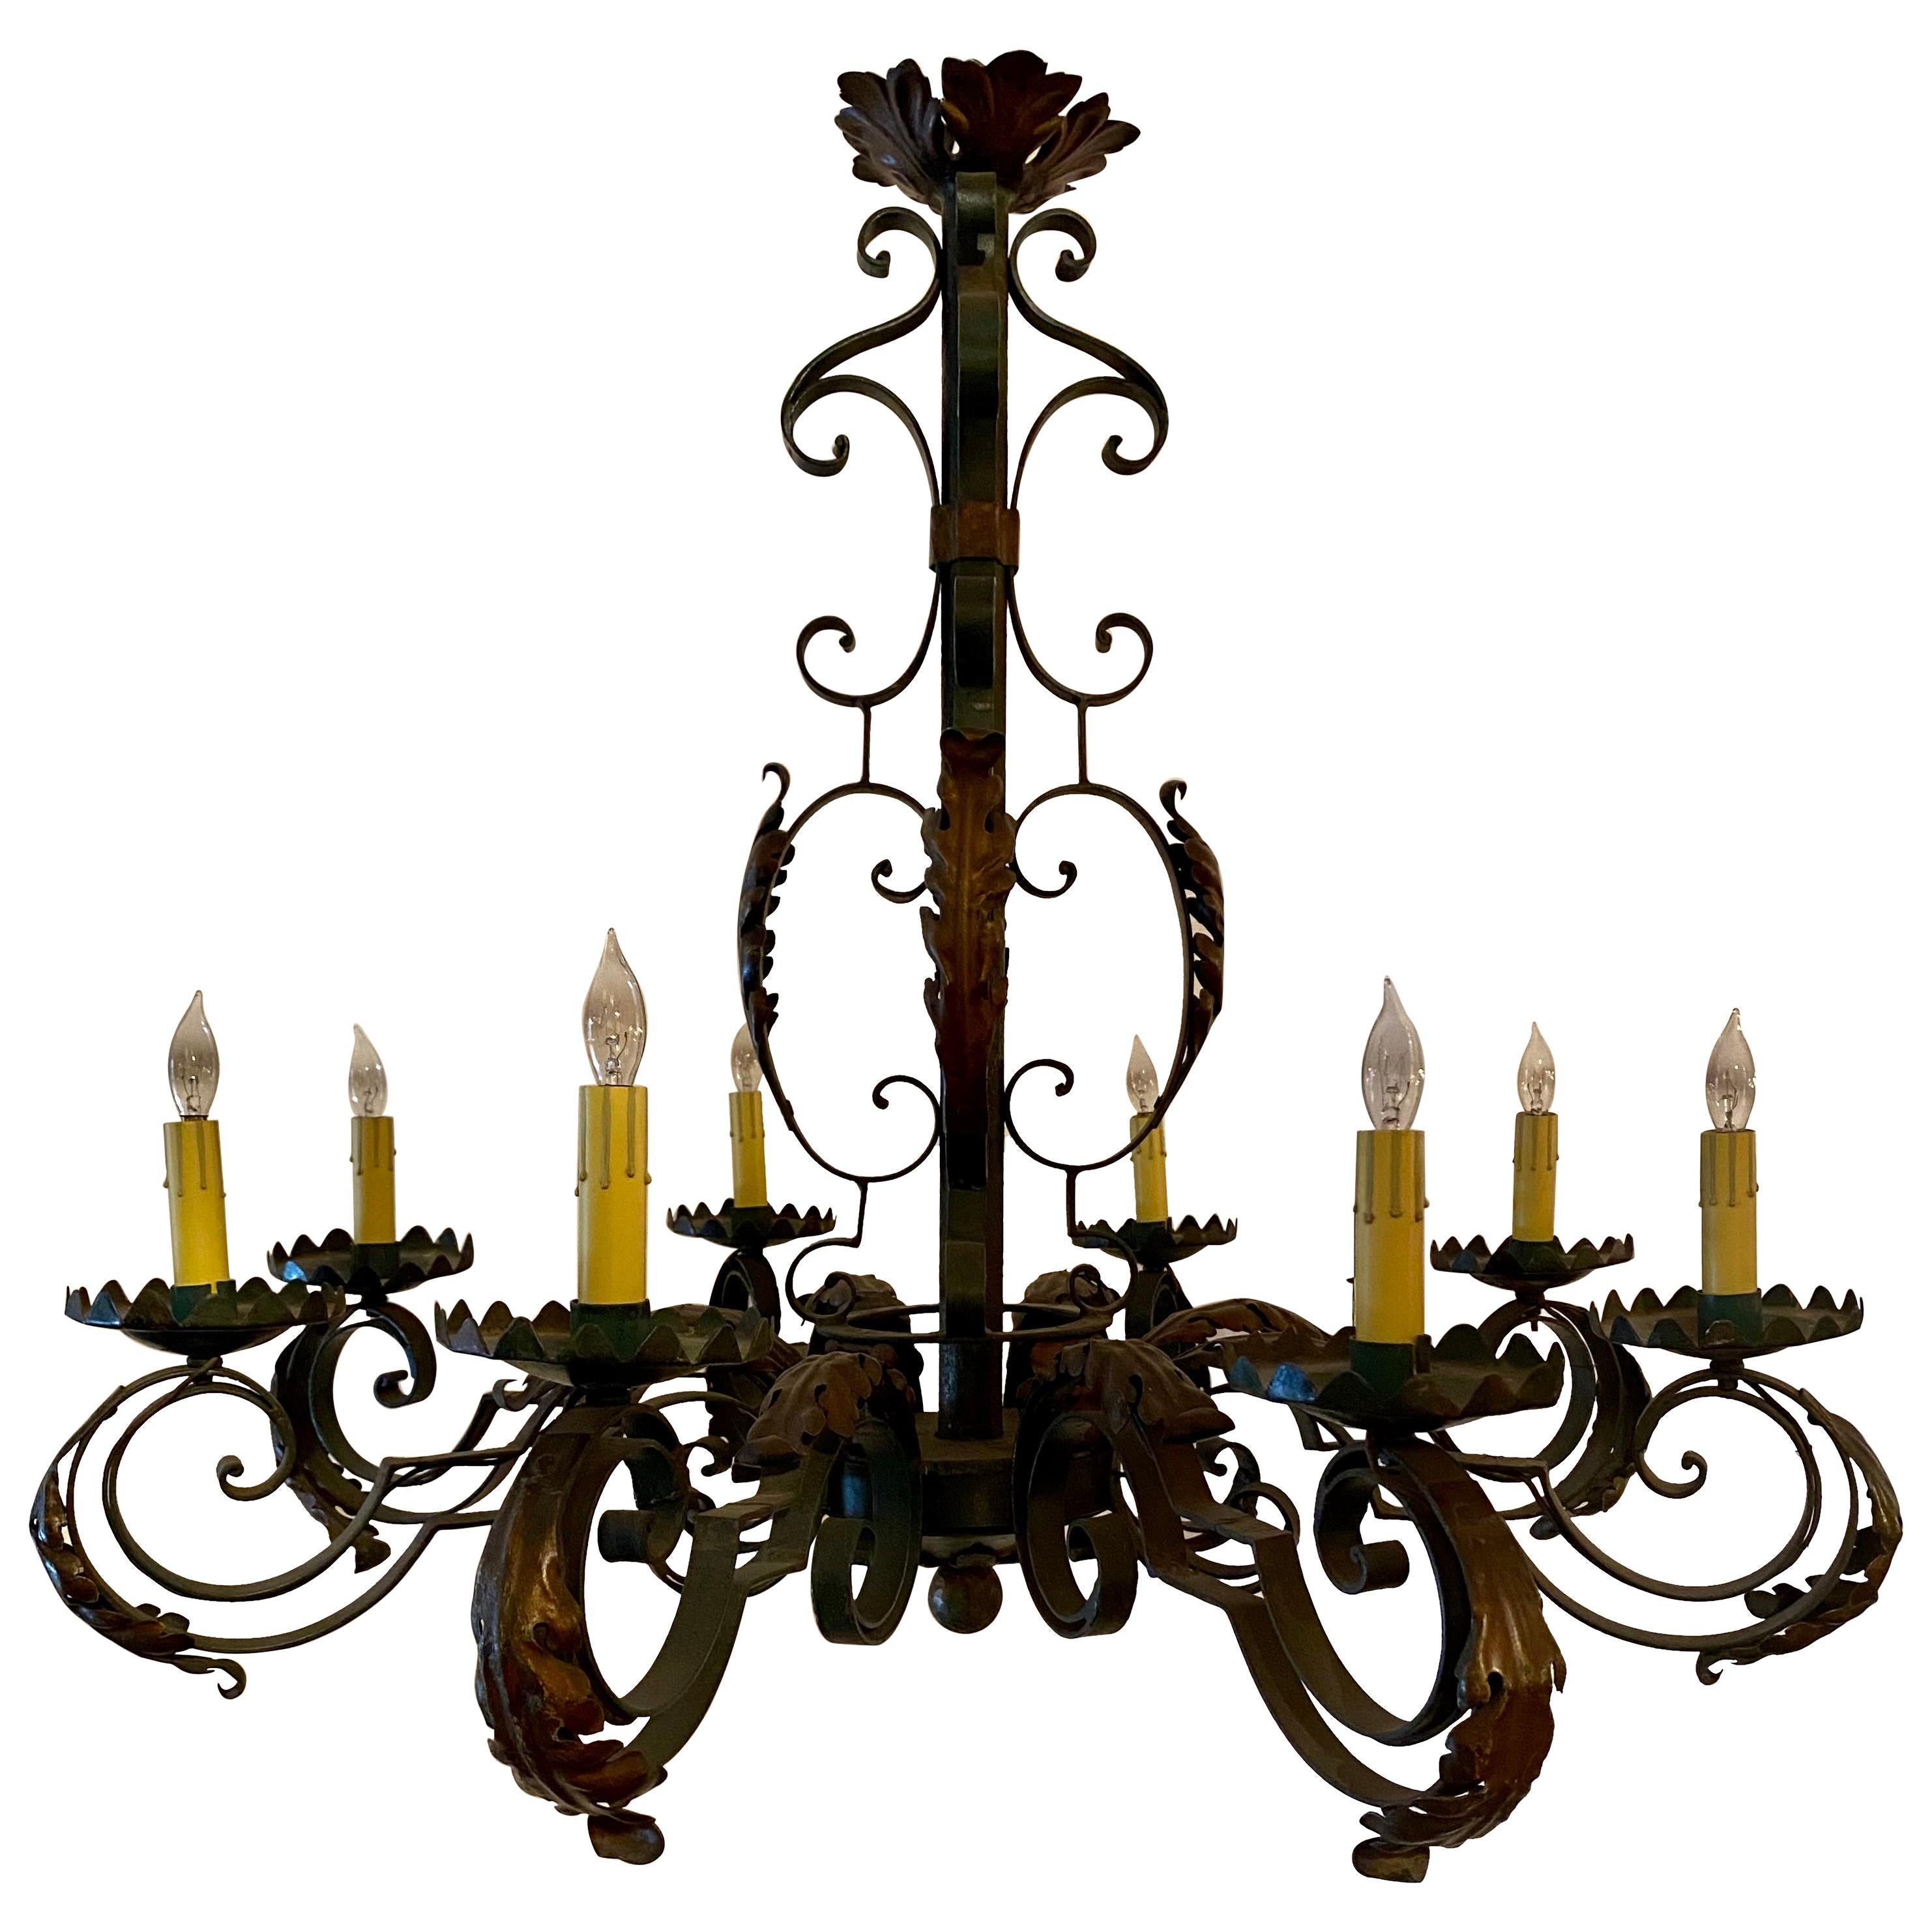 Antique French Old Iron Tavern Chandelier with 8 Lights, Circa 1890-1910